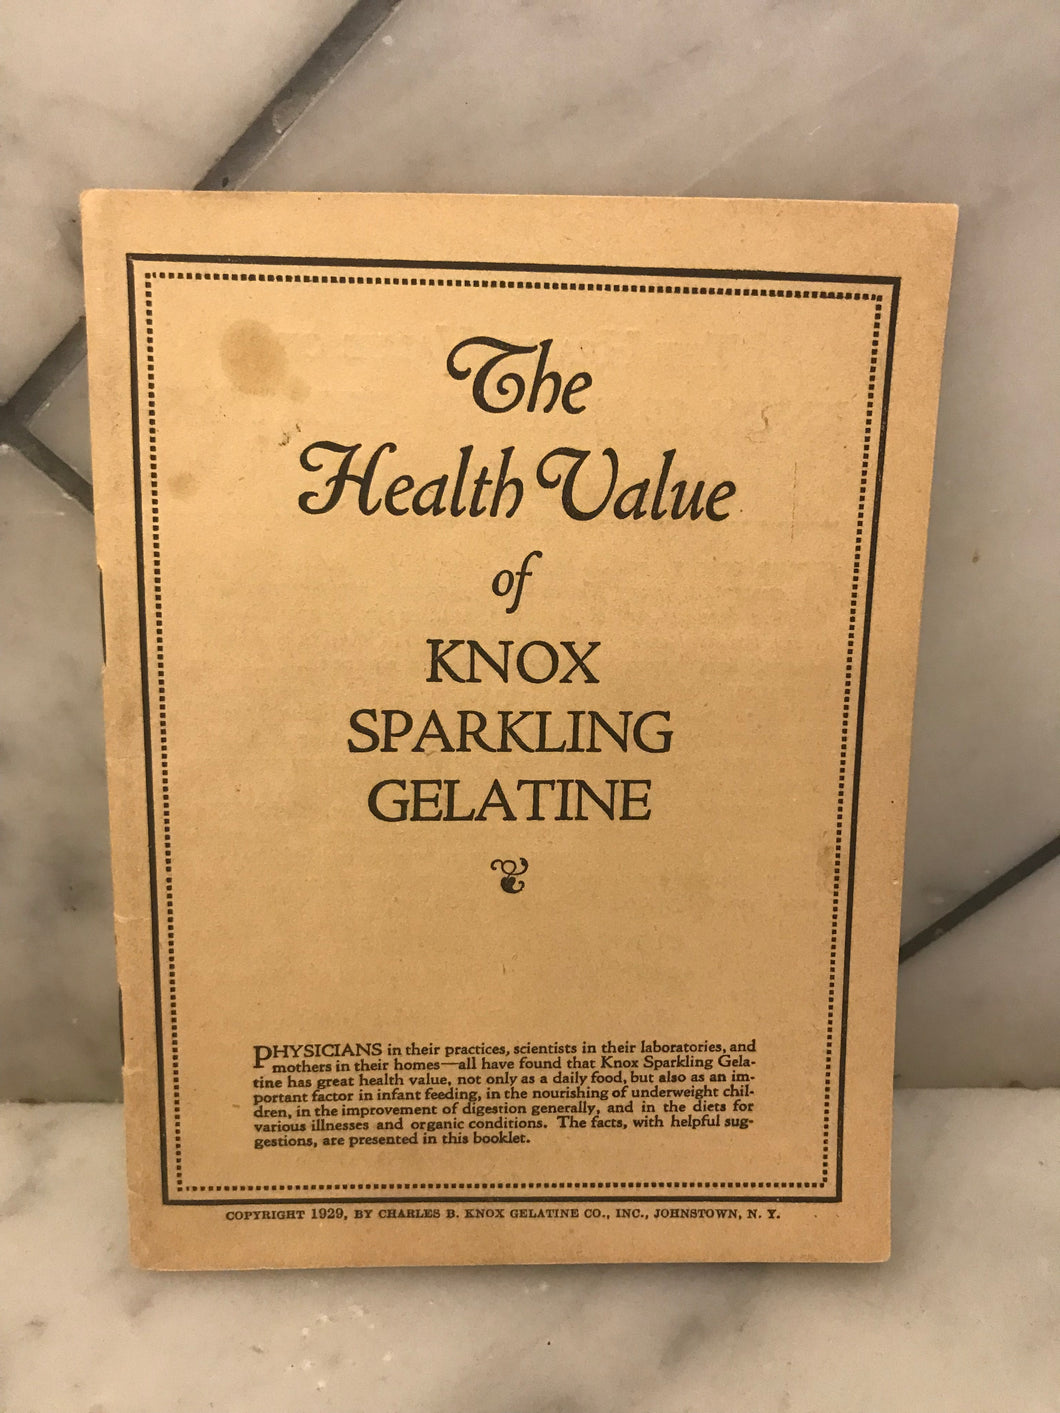 The Health Value of Knox Sparkling Gelatin